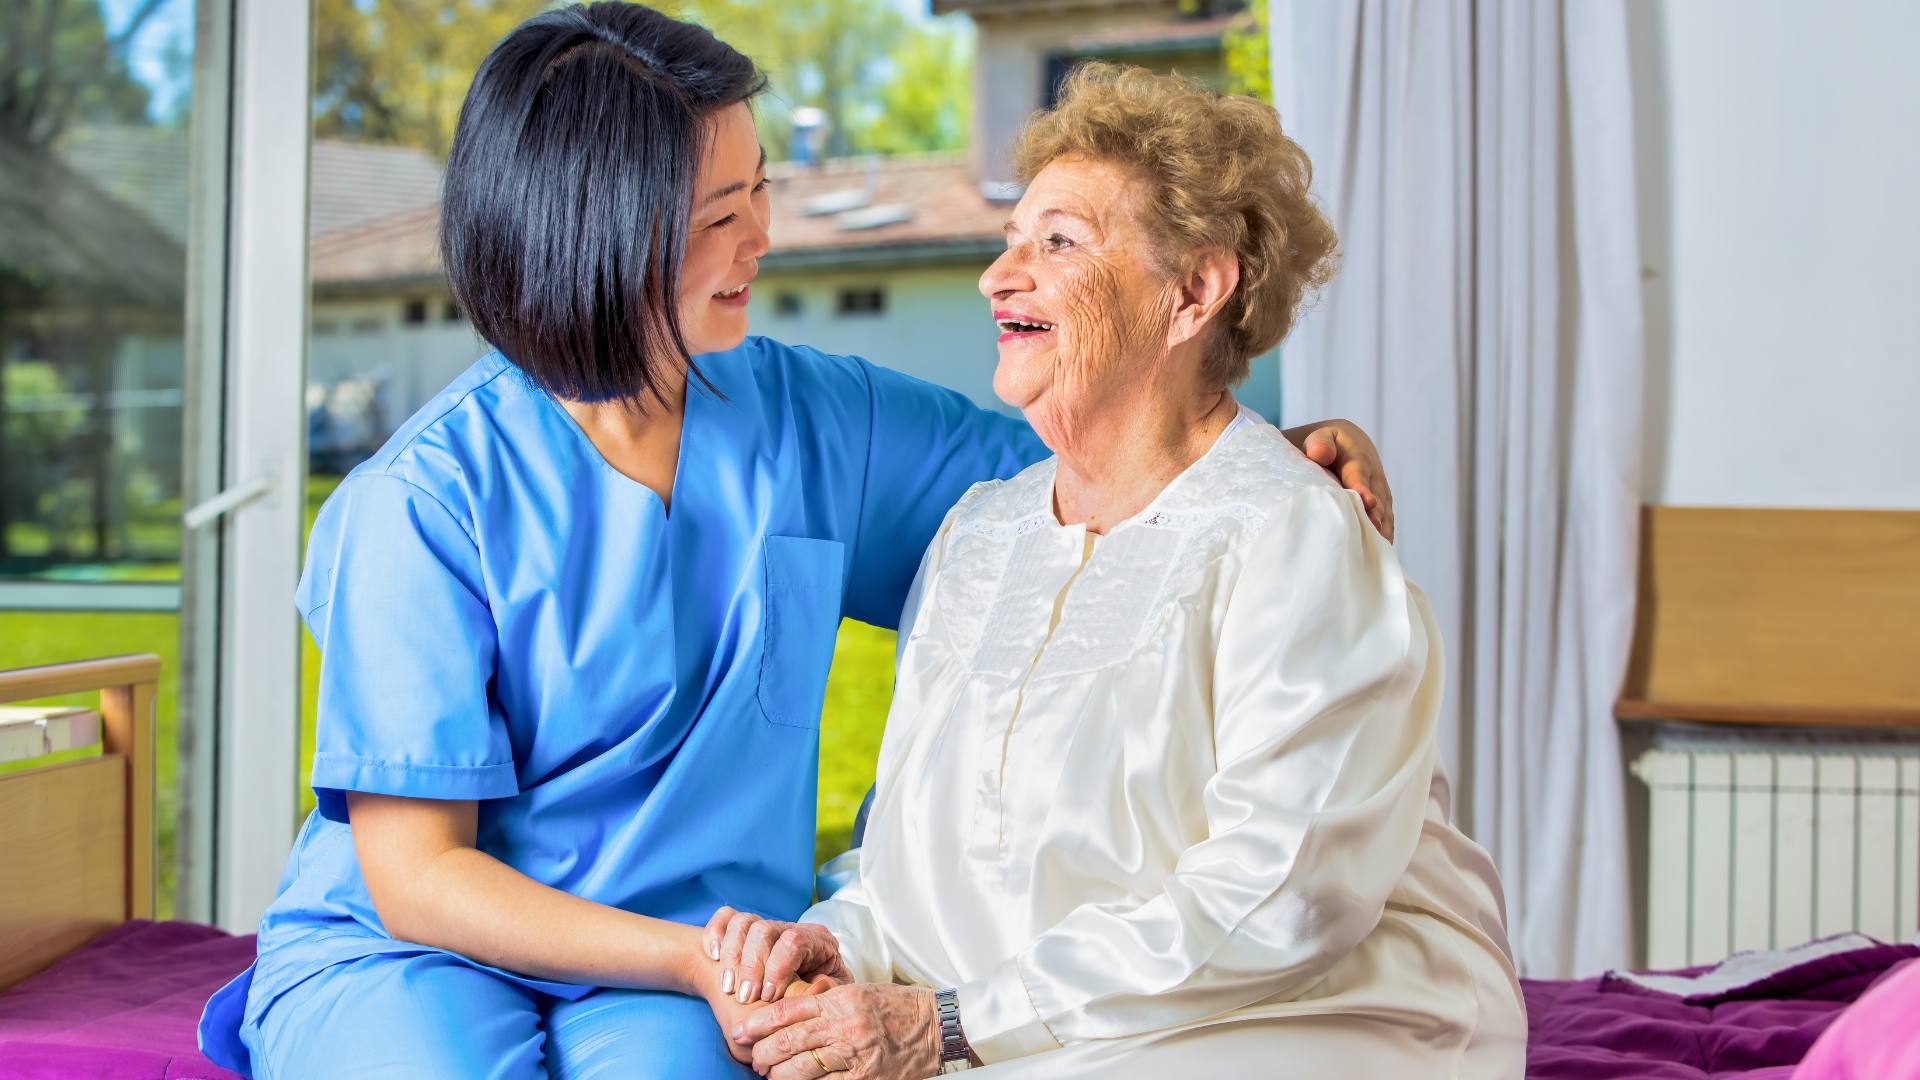 A nurse with her patient in the patient's home, exemplifies how it's possible to find travel nurse jobs as an RN.